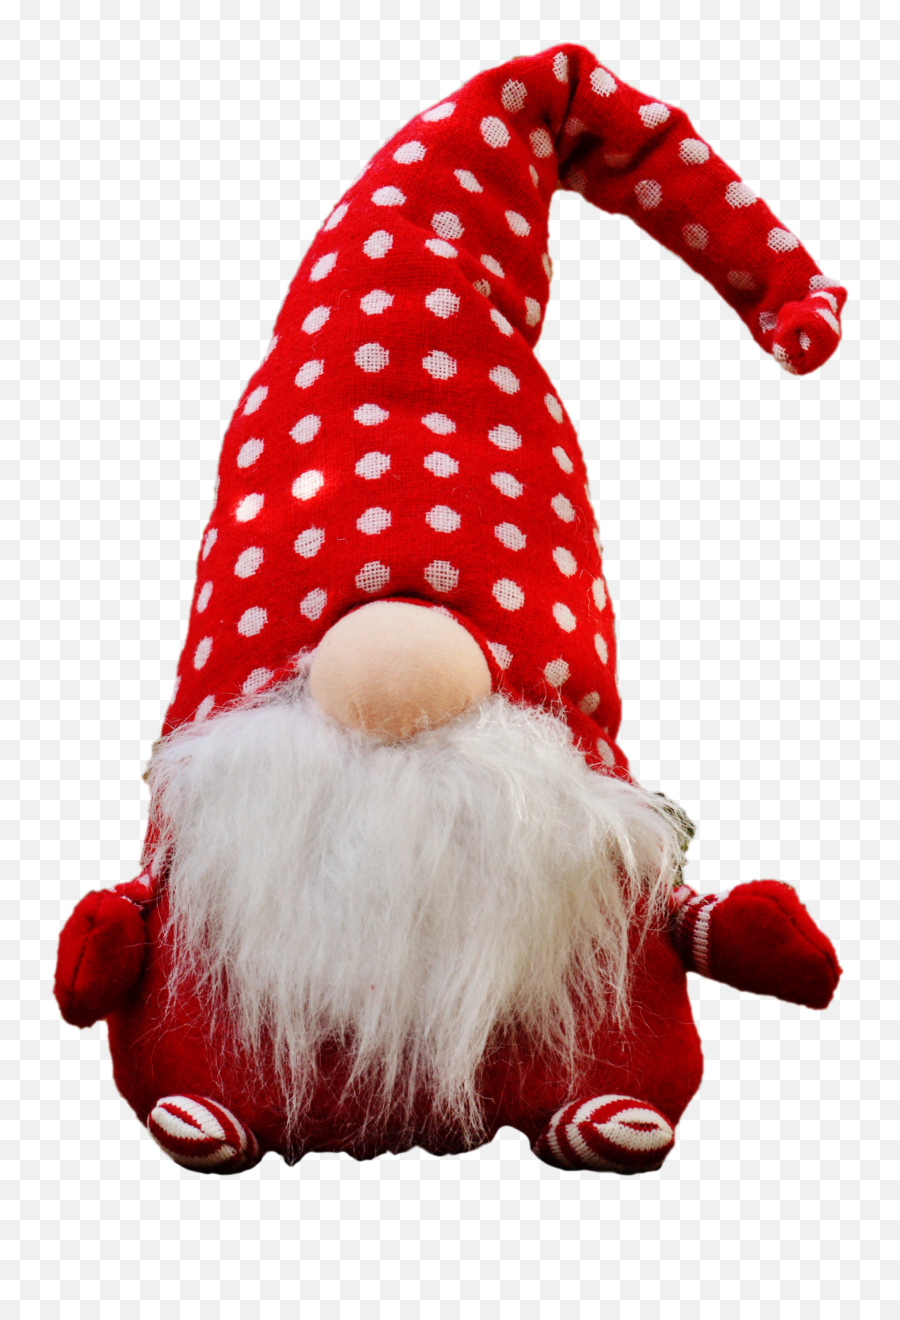 Free Christmas Elf Soft Toy Png Image - Christmas Elf Png Transparent,Free Christmas Png